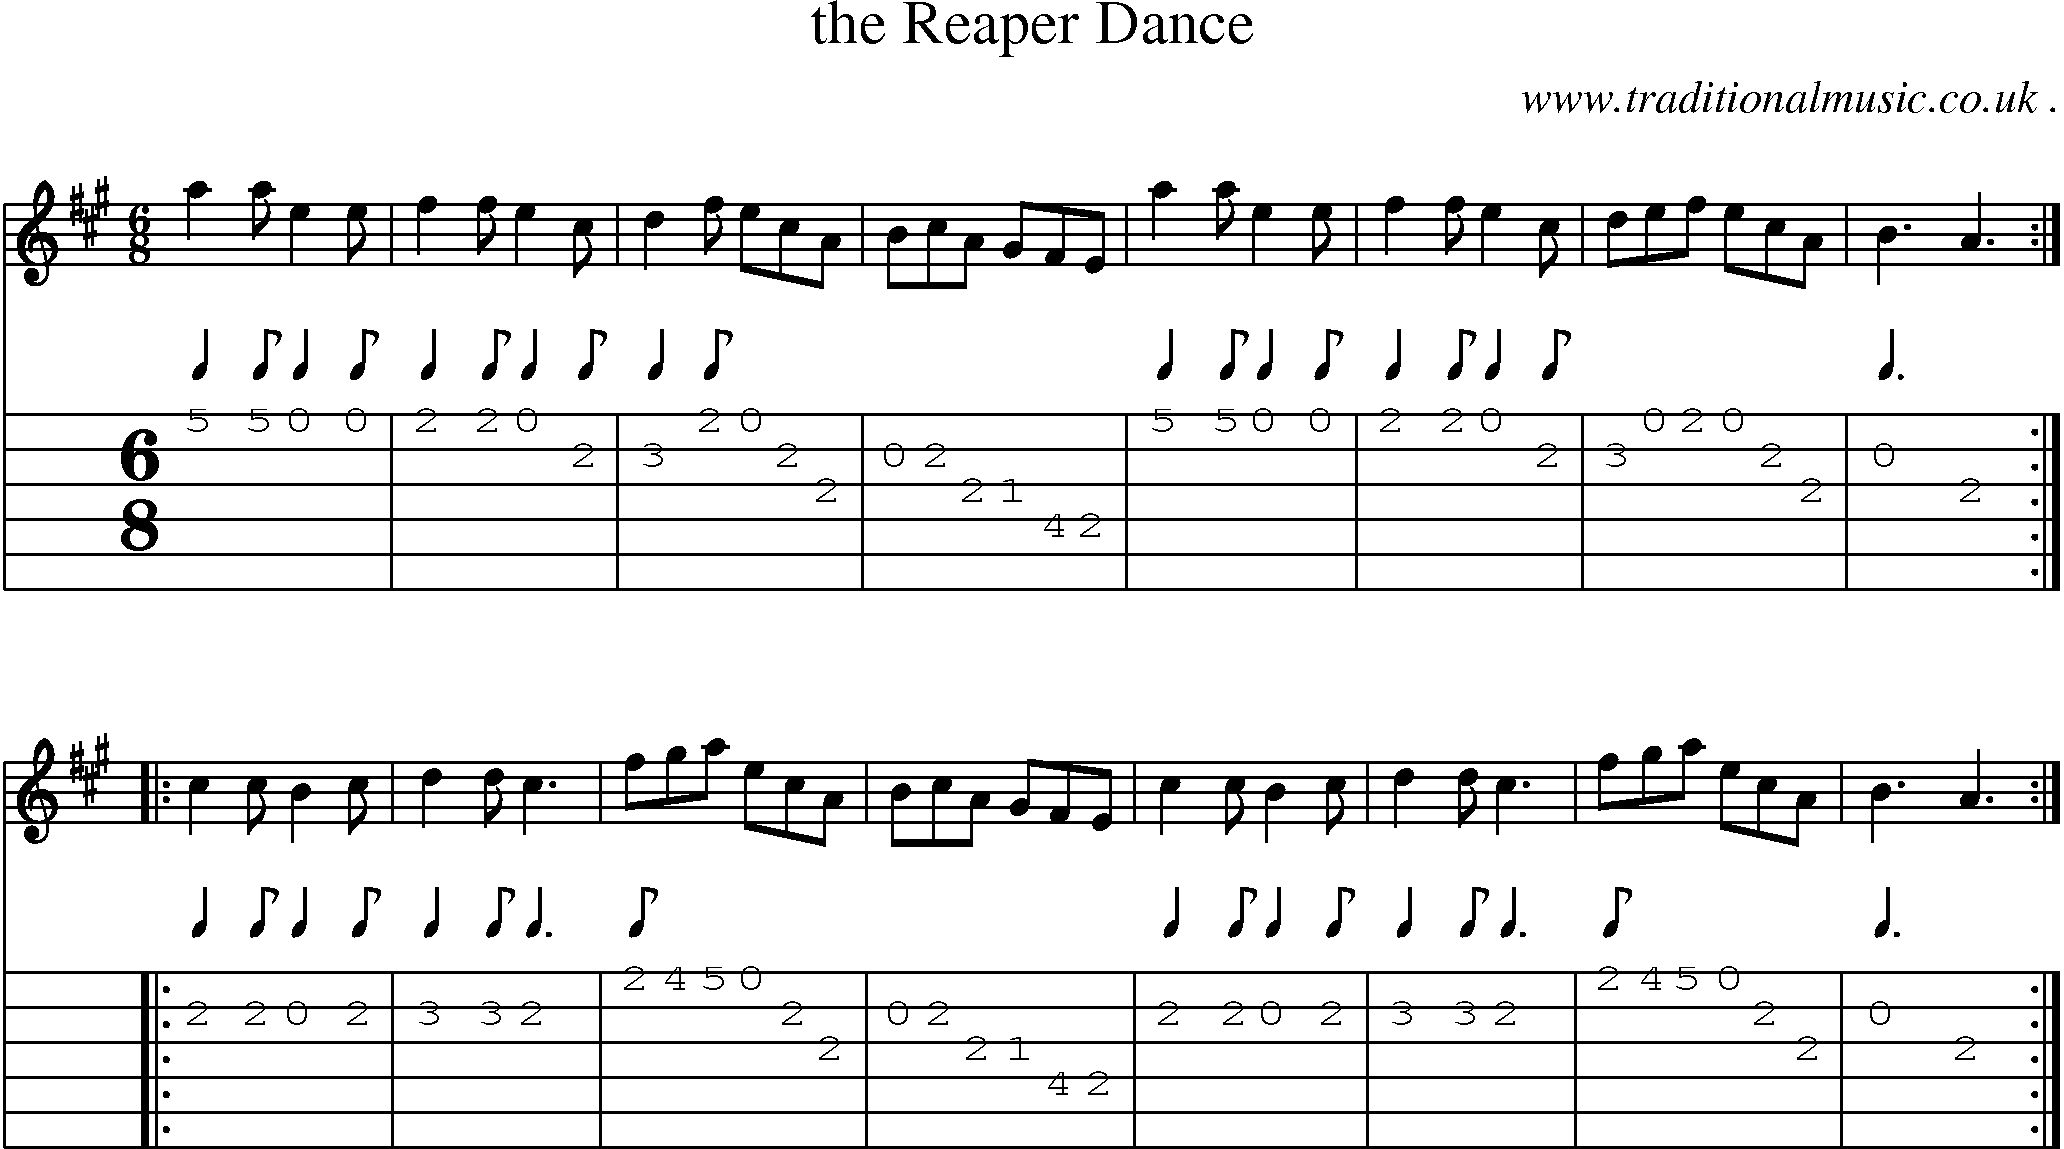 Sheet-Music and Guitar Tabs for The Reaper Dance